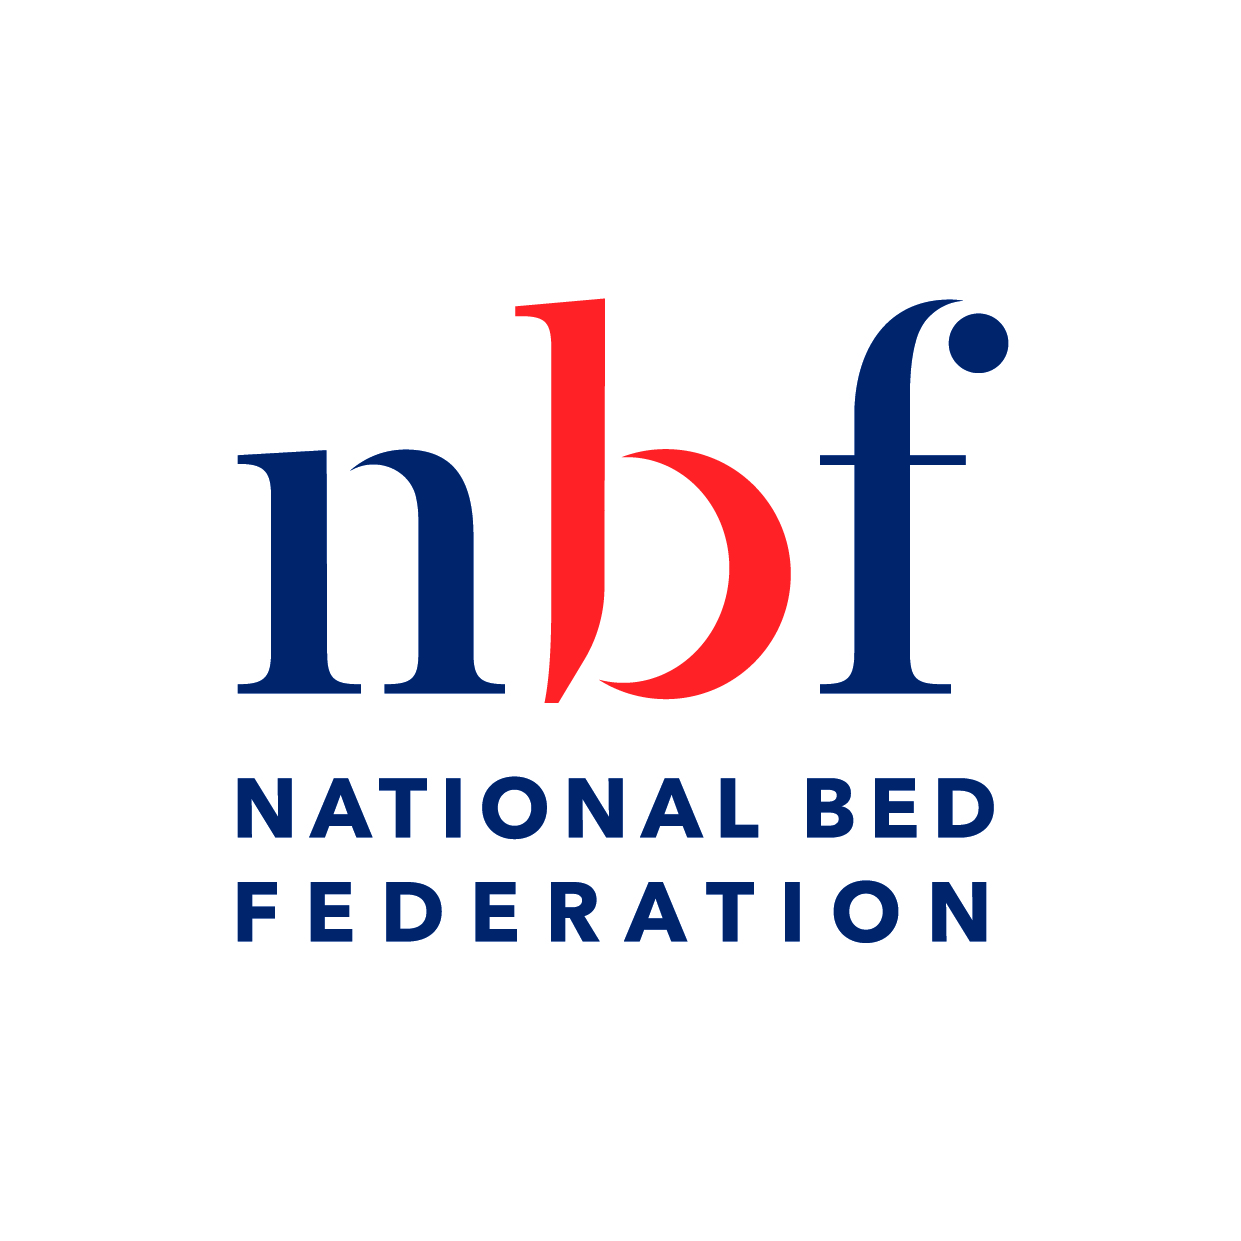 The National Bed Federation (NBF)